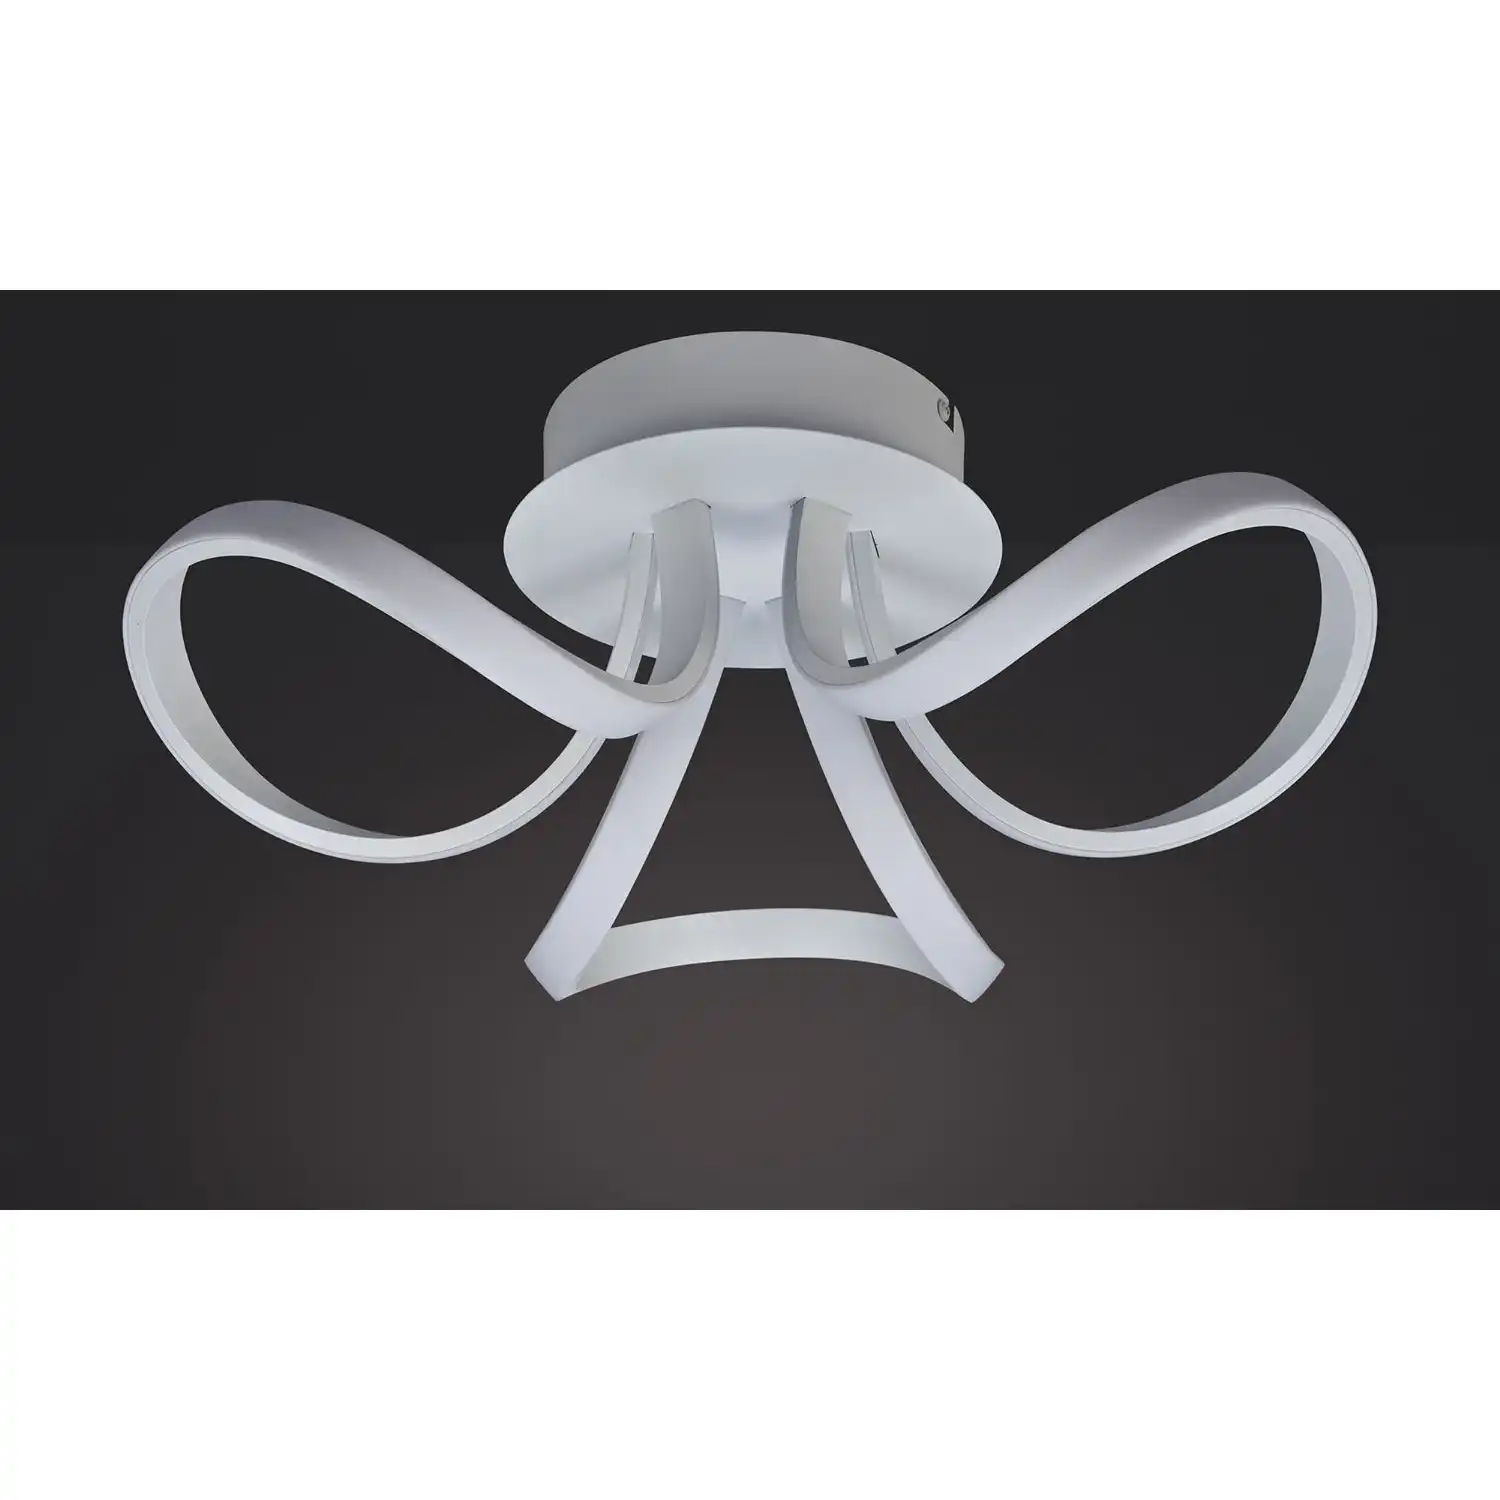 Knot Blanco Ceiling 48cm Round 3 Looped Arms 36W LED 4000K, 2520lm, White Frosted Acrylic, 3yrs Warranty